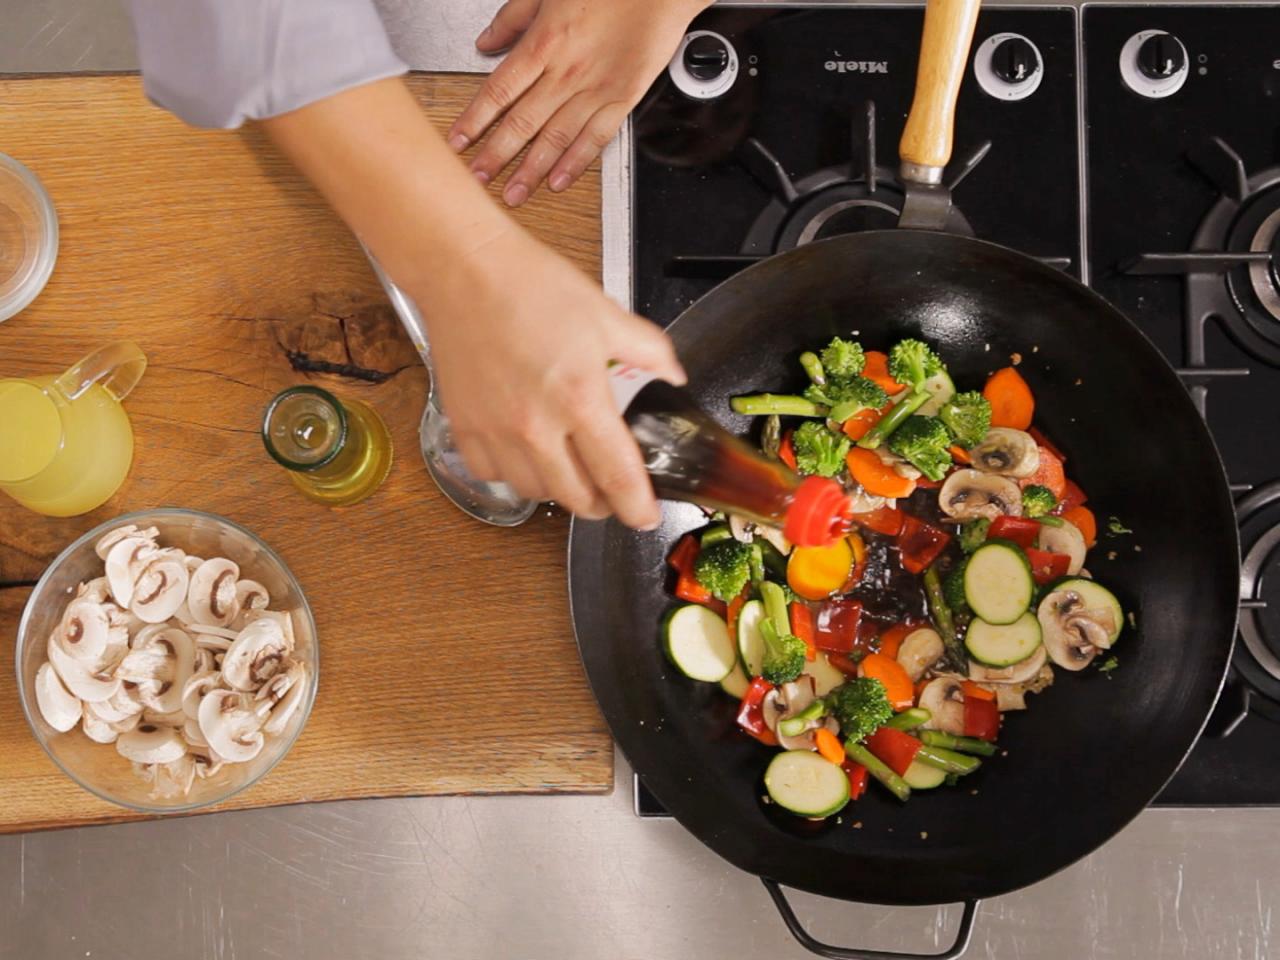 Stir-frying in a Cast-Iron Pan: Good or Bad Idea?